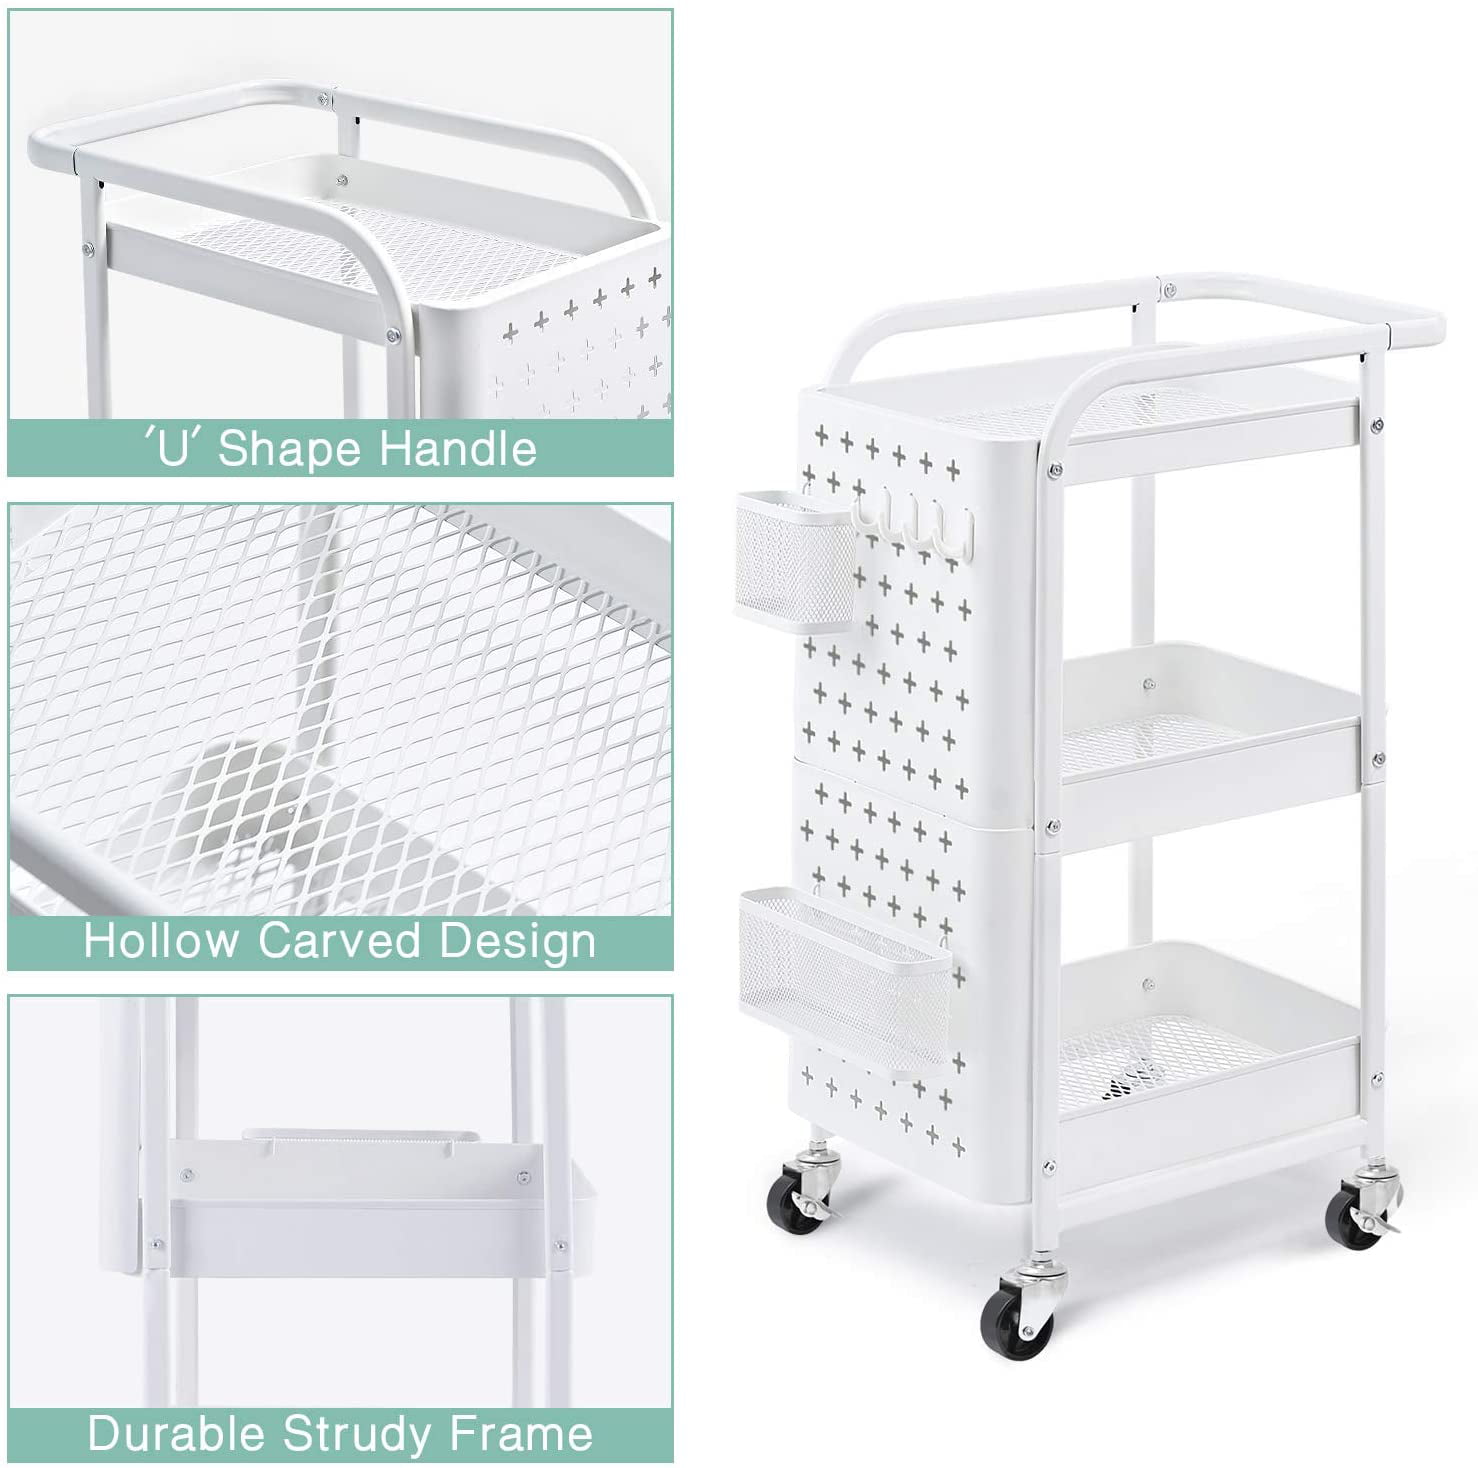 White Metal Service Cart with Practical Handle and Extra 2 Baskets TOOLF 3-Tier Storage Rolling Cart Trolley Organizer with Removable Pegboard 4 Hooks for Kitchen Office Home 